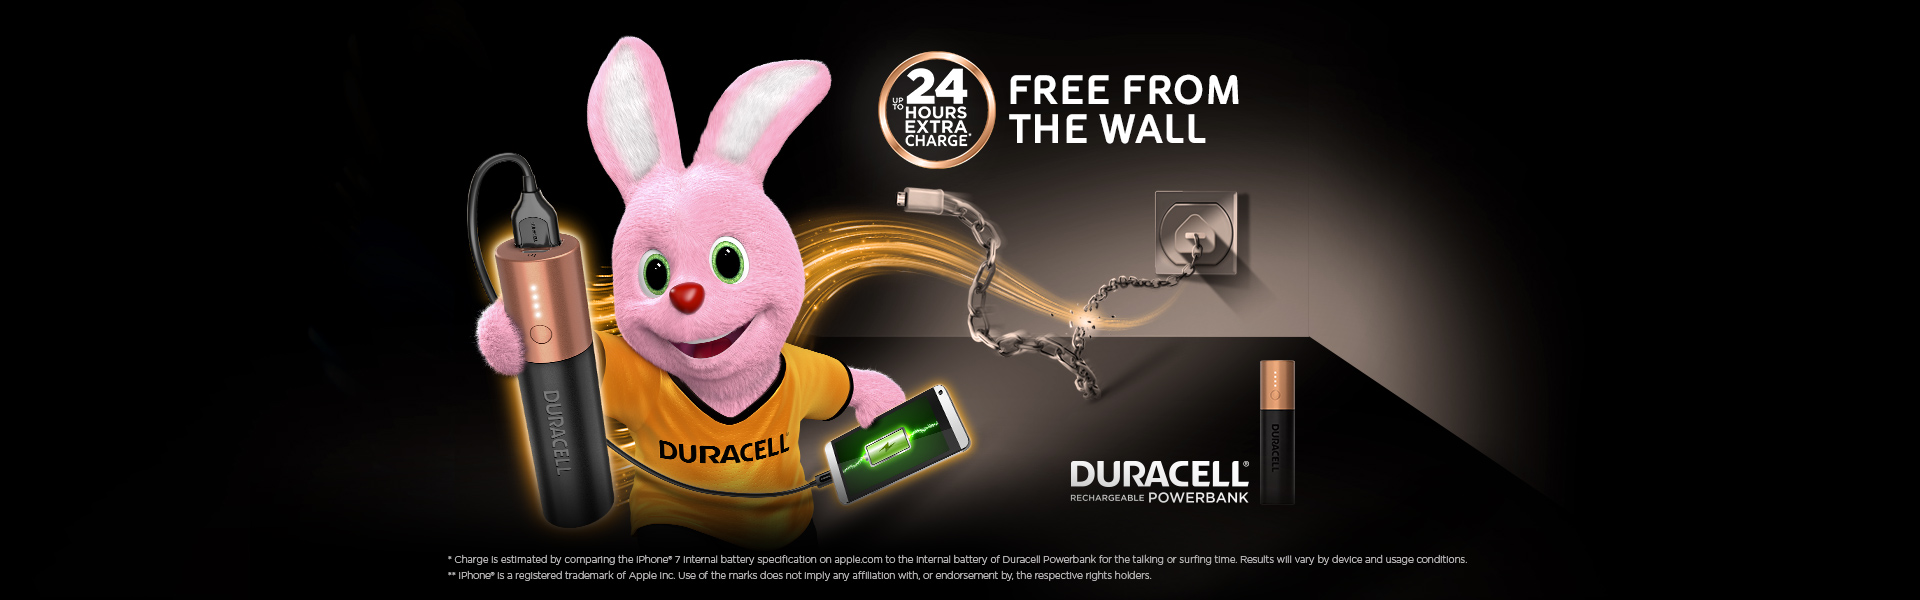 Duracell Rechargeable Power bank 3350mAh - Free from the Wall banner